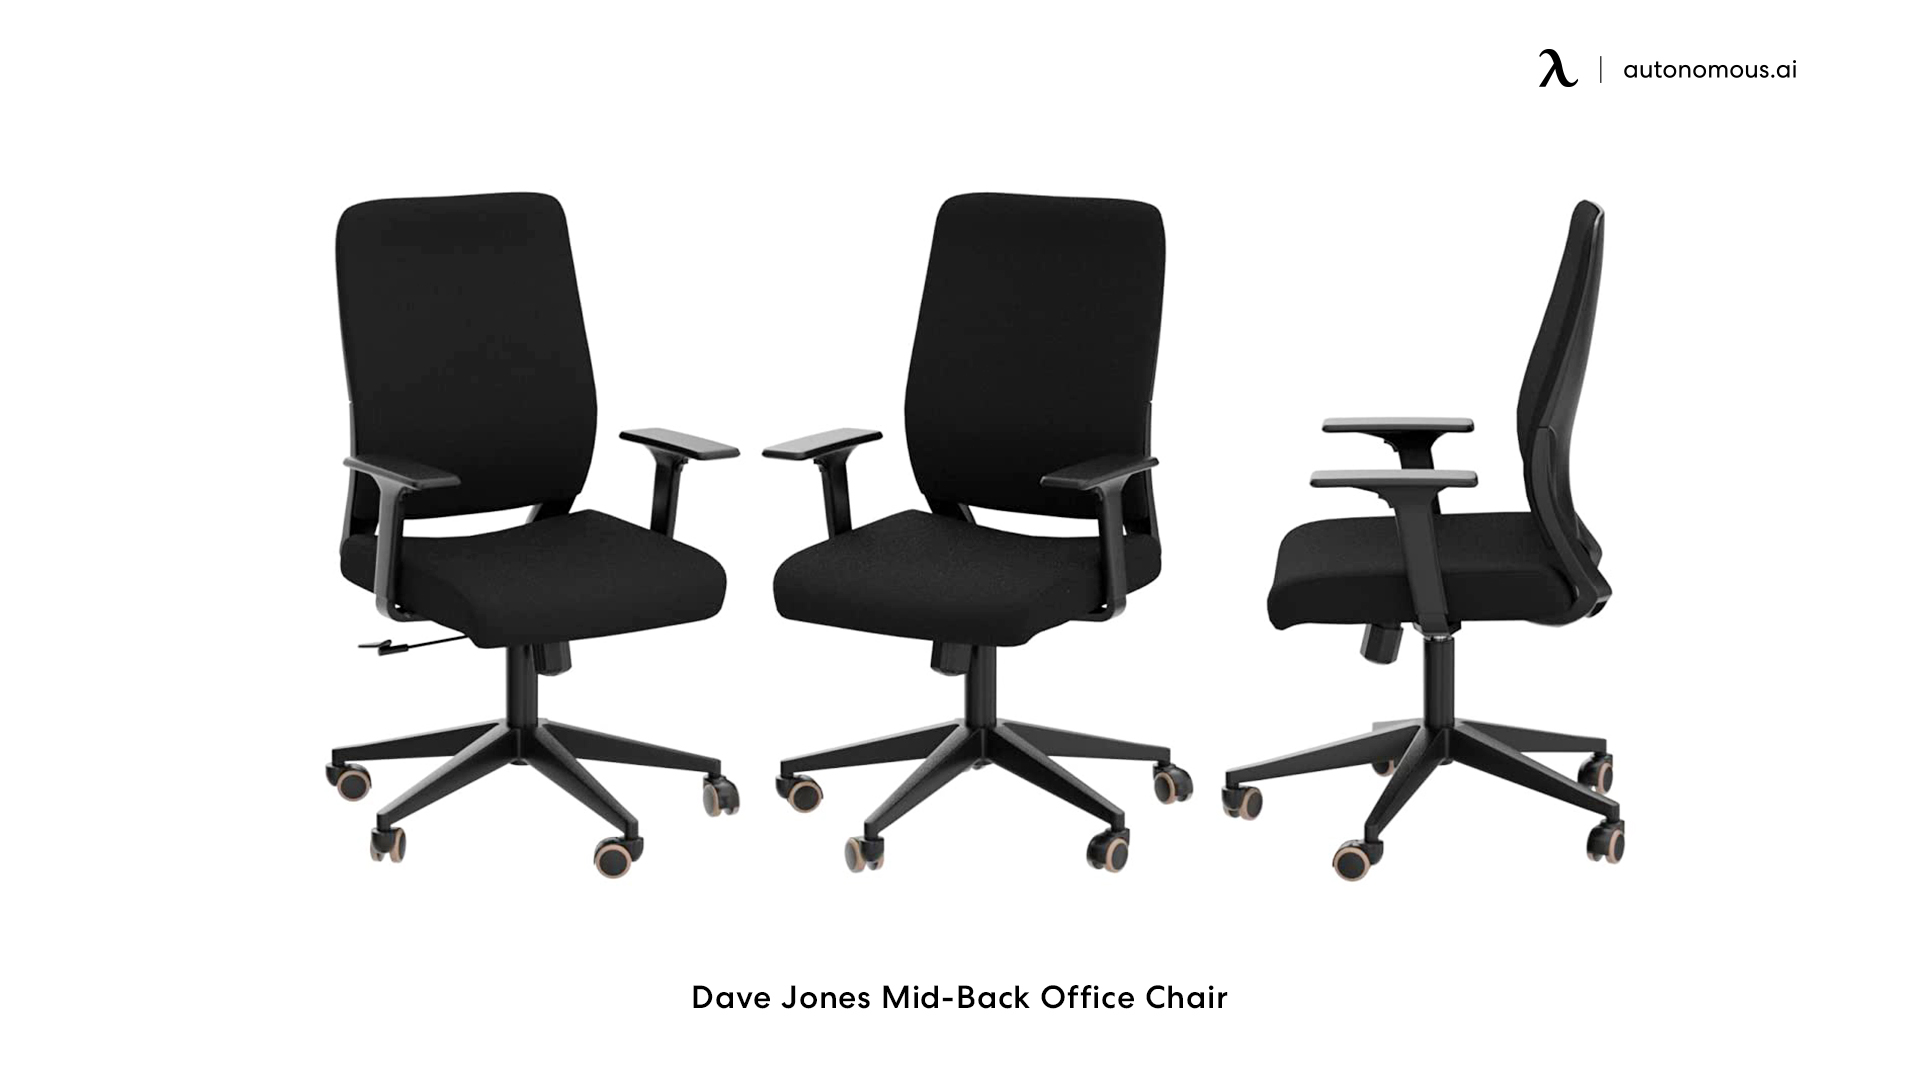 Dave Jones large office chair